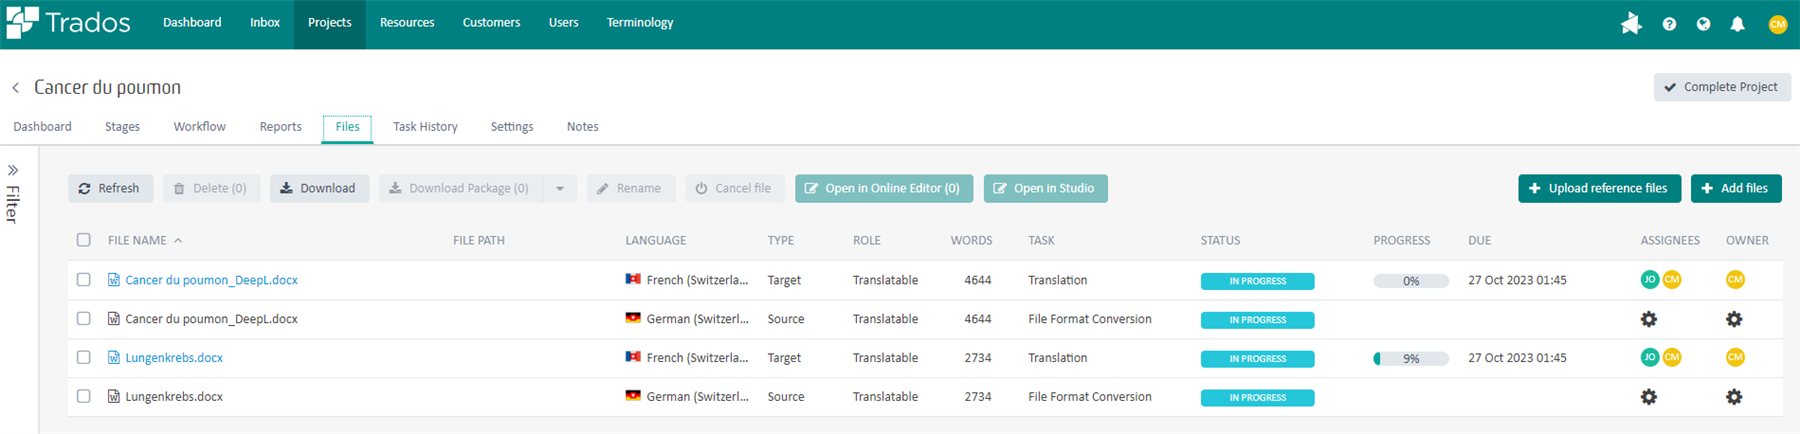 Trados Studio interface showing the 'Files' tab with a list of documents. The 'Delete' button is visible on the left side next to the 'Refresh' button.